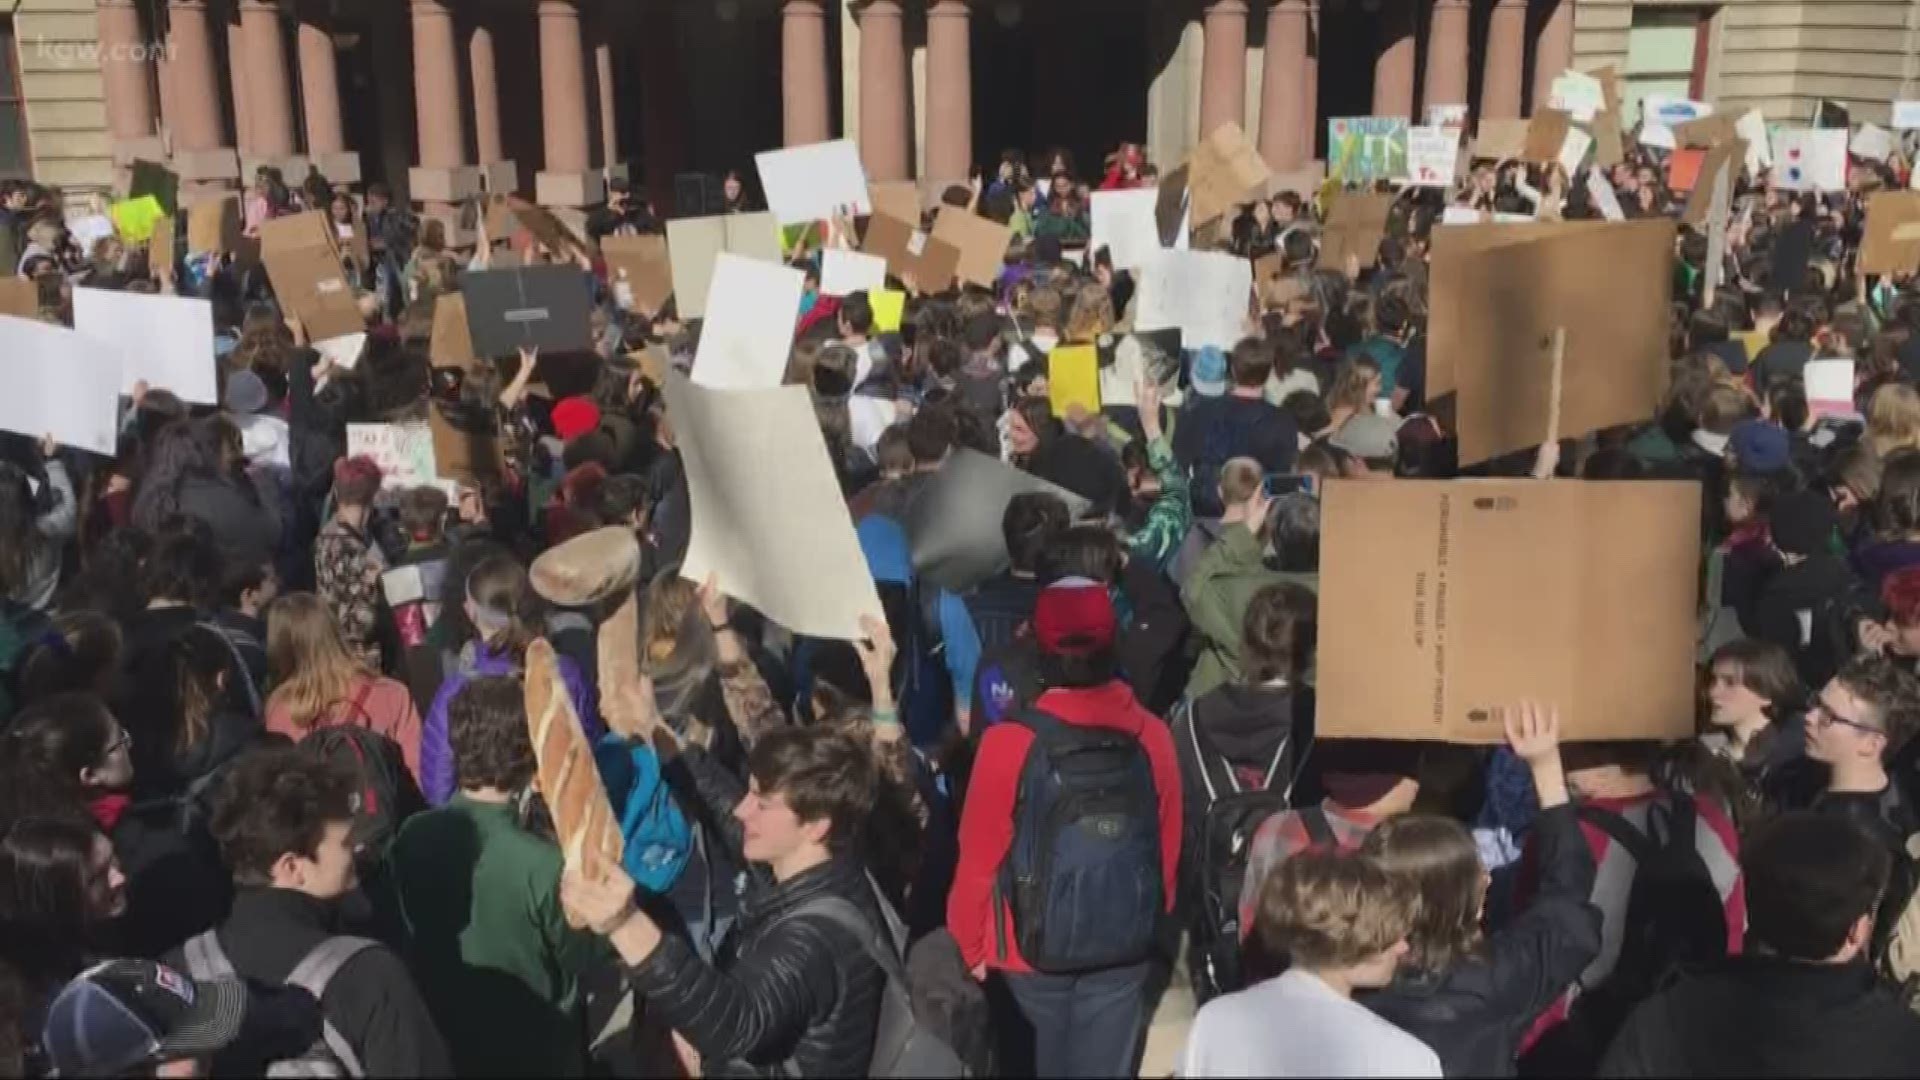 Portland students join worldwide walkout calling attention to climate change